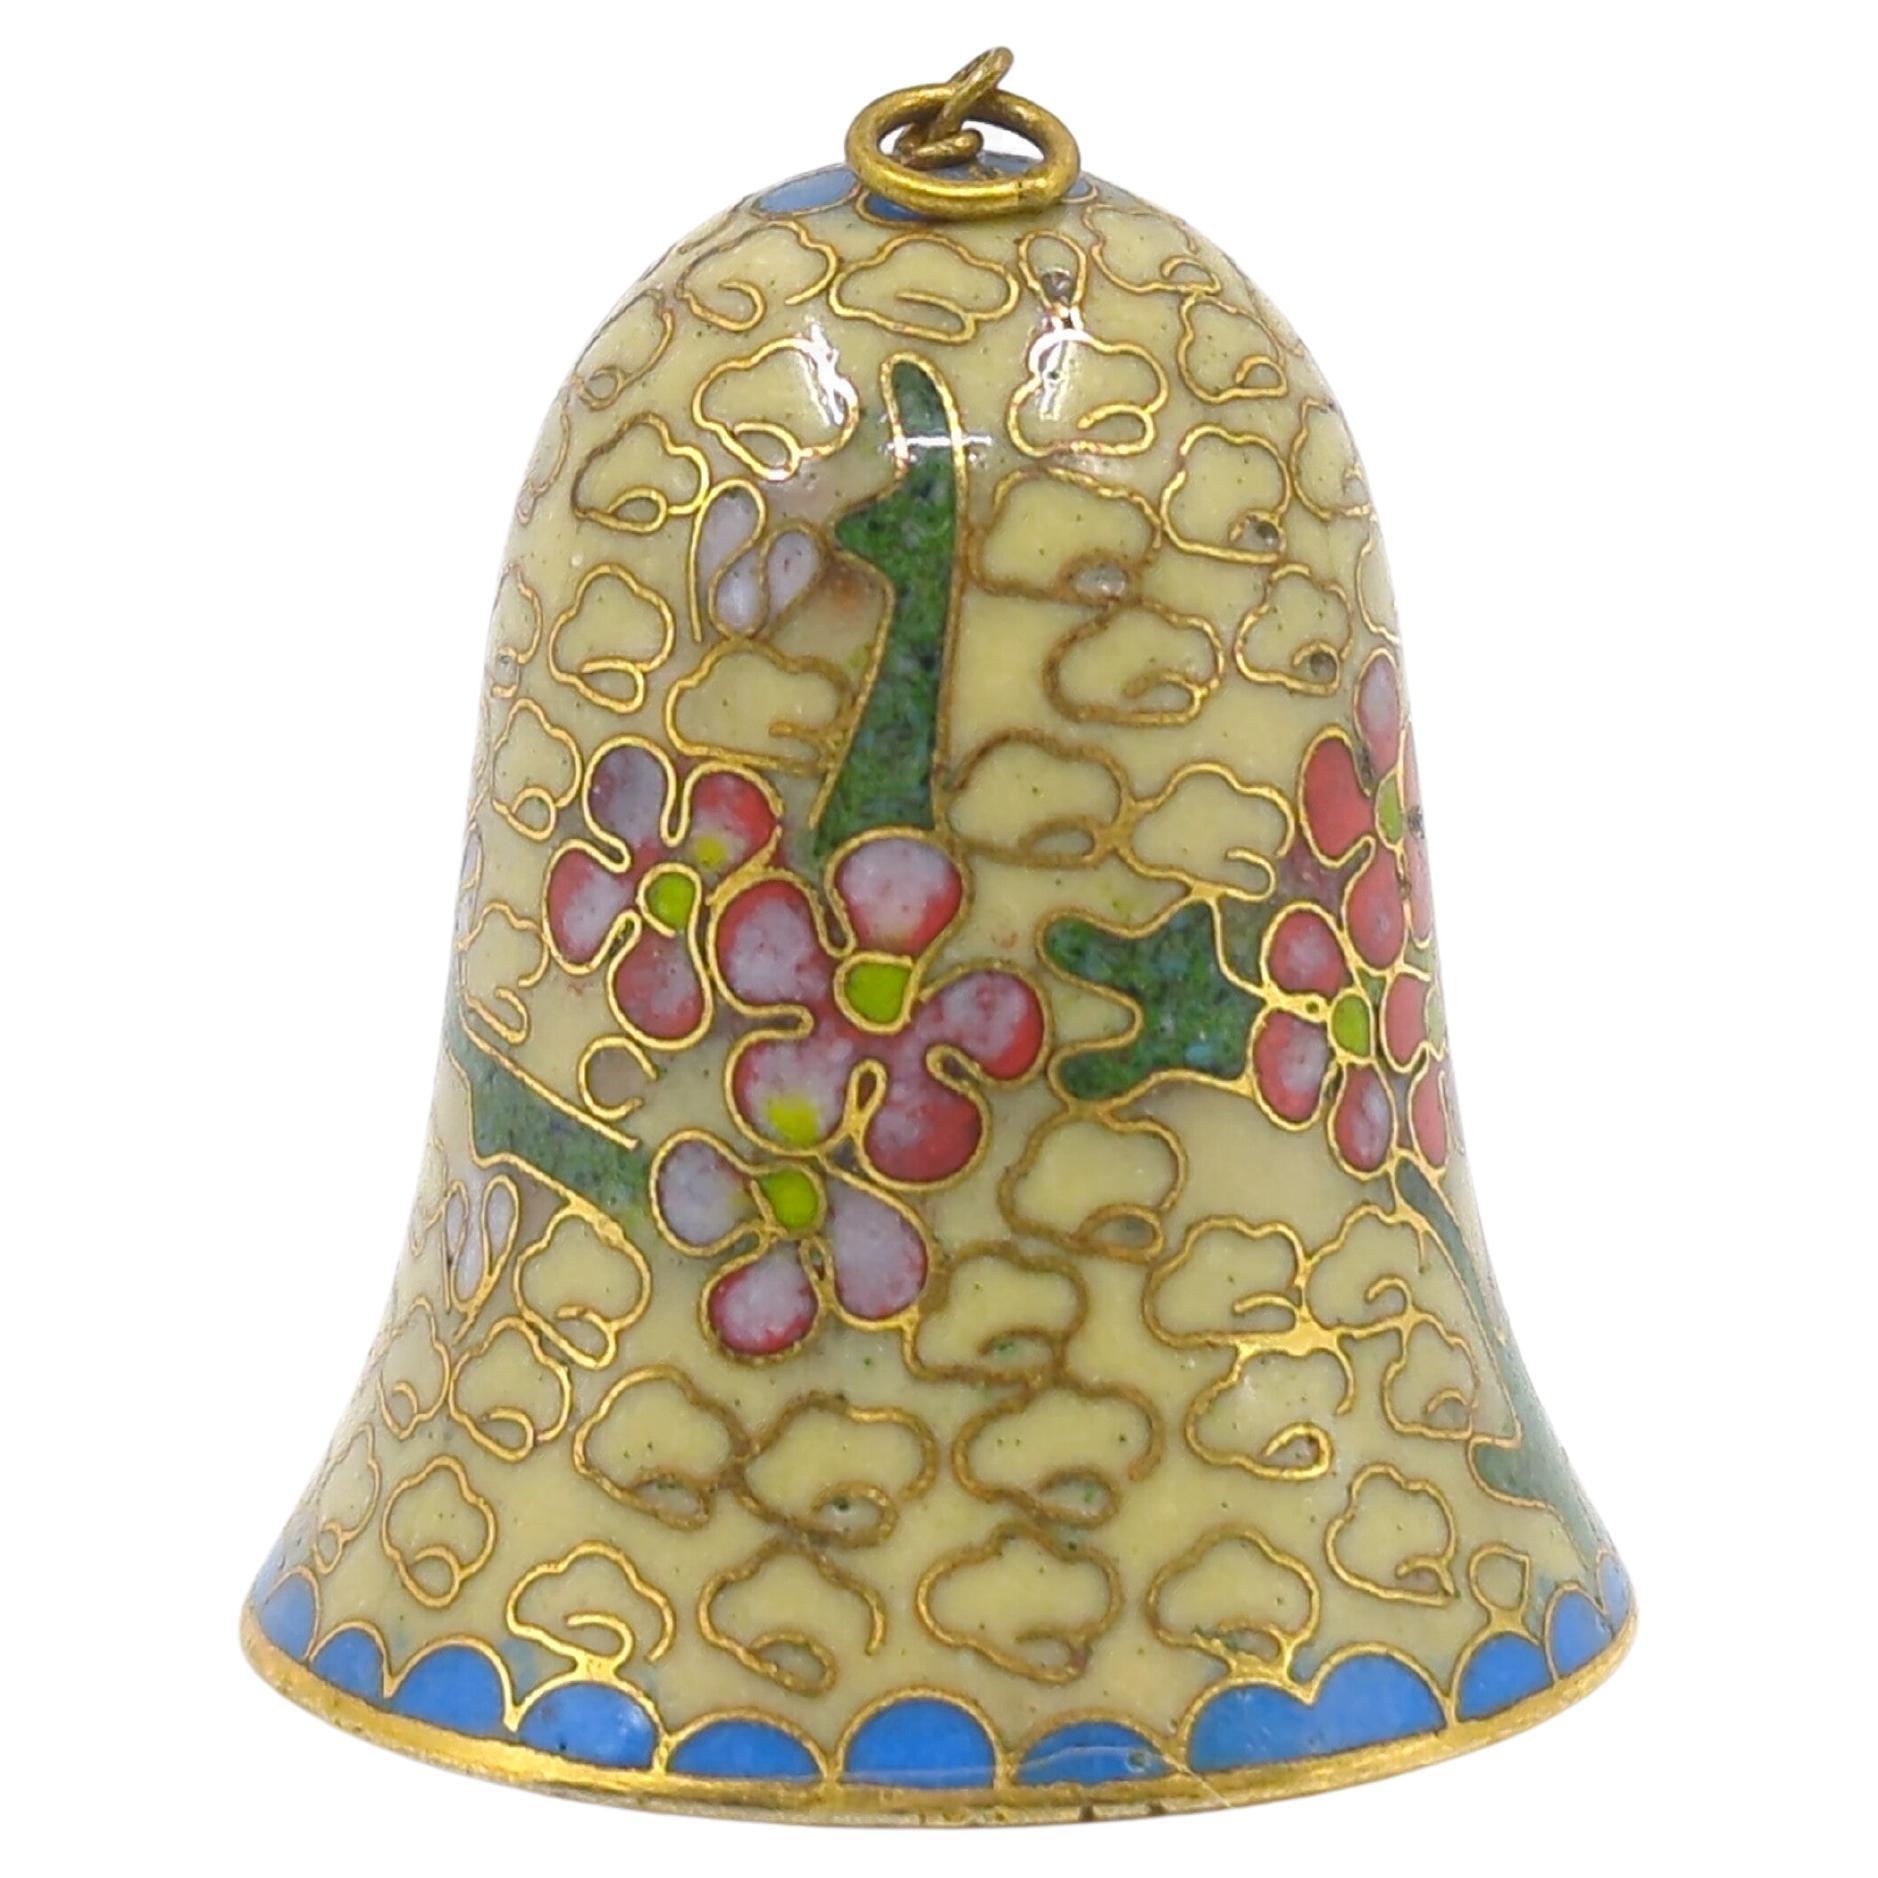 Antique Chinese cloisonne enamelled bell, with gilt gold details and a jade striker

This wonderfully little bell strikes a charming tone, and makes a lovely present for that treasured person or pet companion in your life!

circa 1900, late 19th to